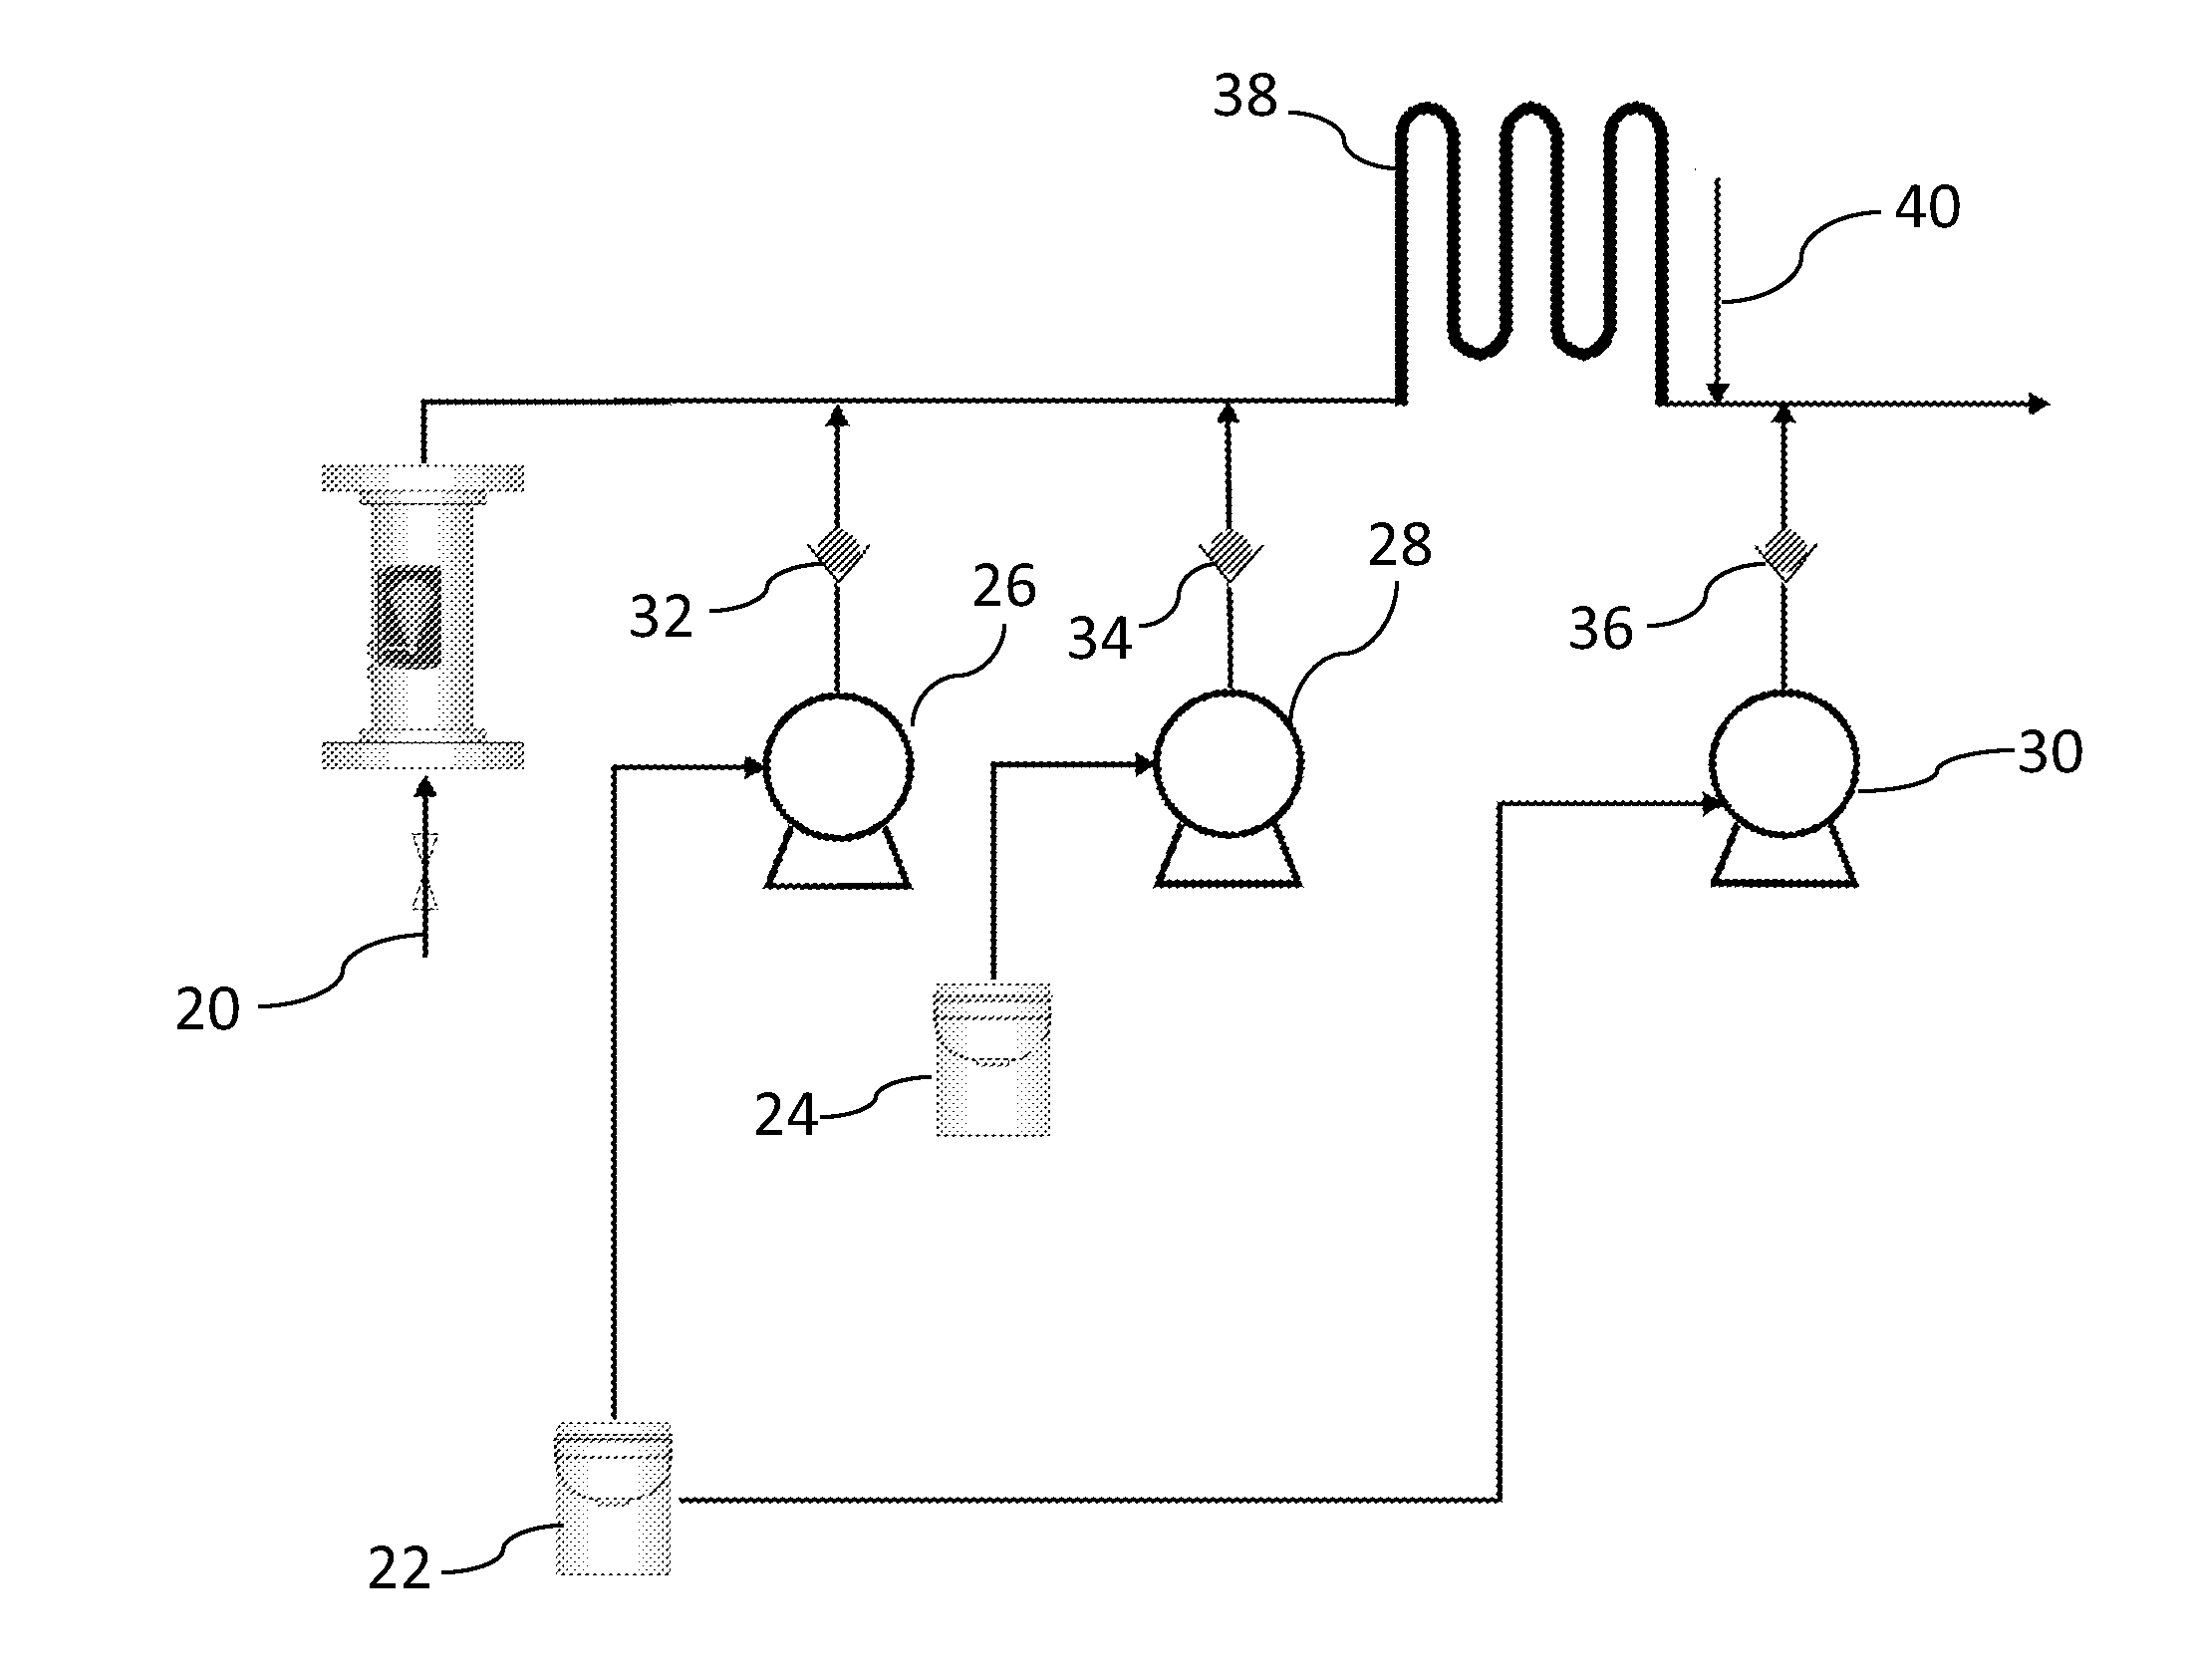 Method And Apparatus For The Enhancement Of The Biocidal Efficacy Of Monoalkyldithiocarbamate Salts